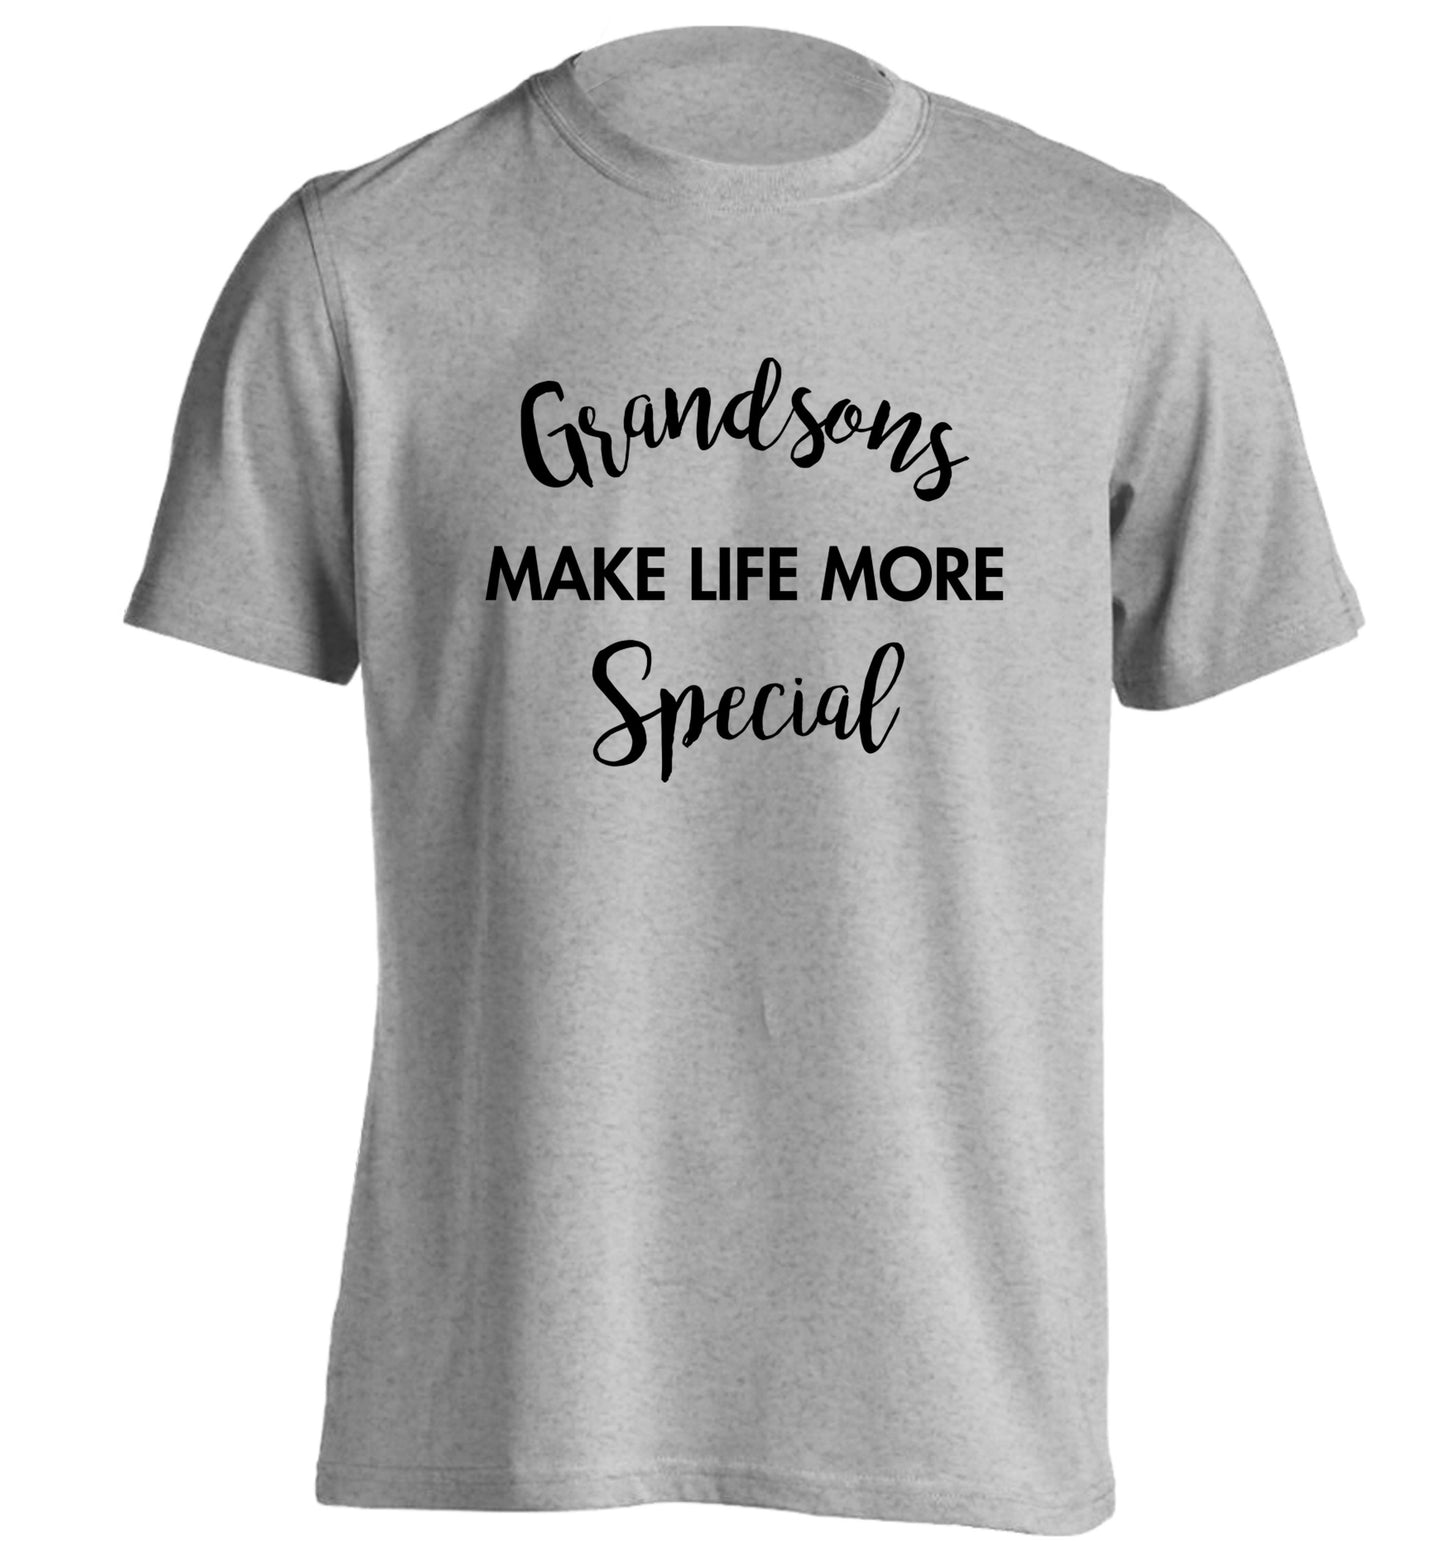 Grandsons make life more special adults unisex grey Tshirt 2XL